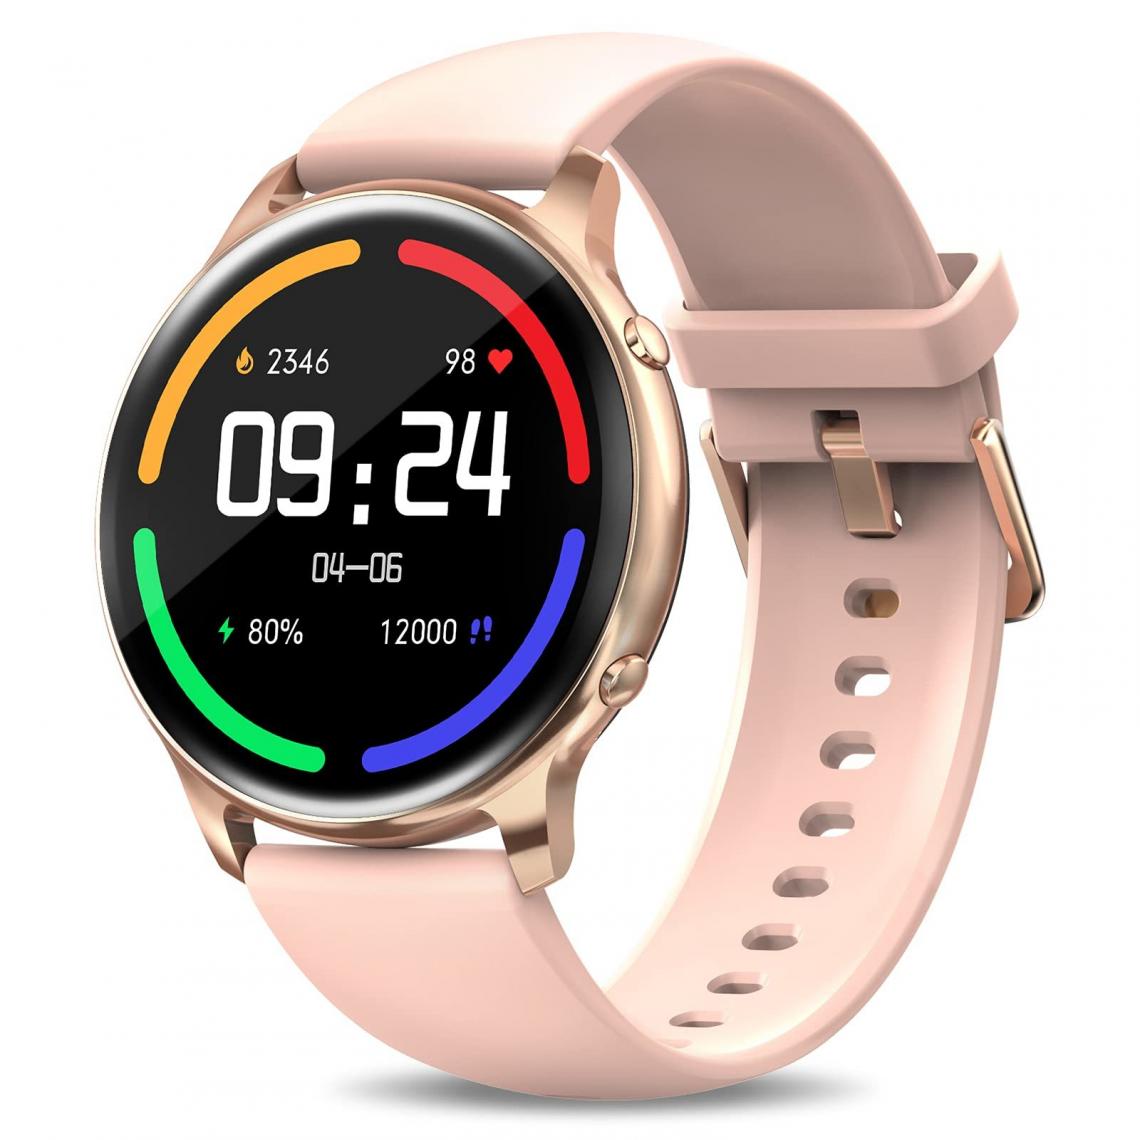 Chronotech Montres - Chronus Smartwatch Men Women, Waterproof Smartwatch 5ATM, Activity Tracker with Heart Rate Monitors, SpO2, Pedometer, Music Control, Smartwatch for iOS / Android(Rose) - Montre connectée